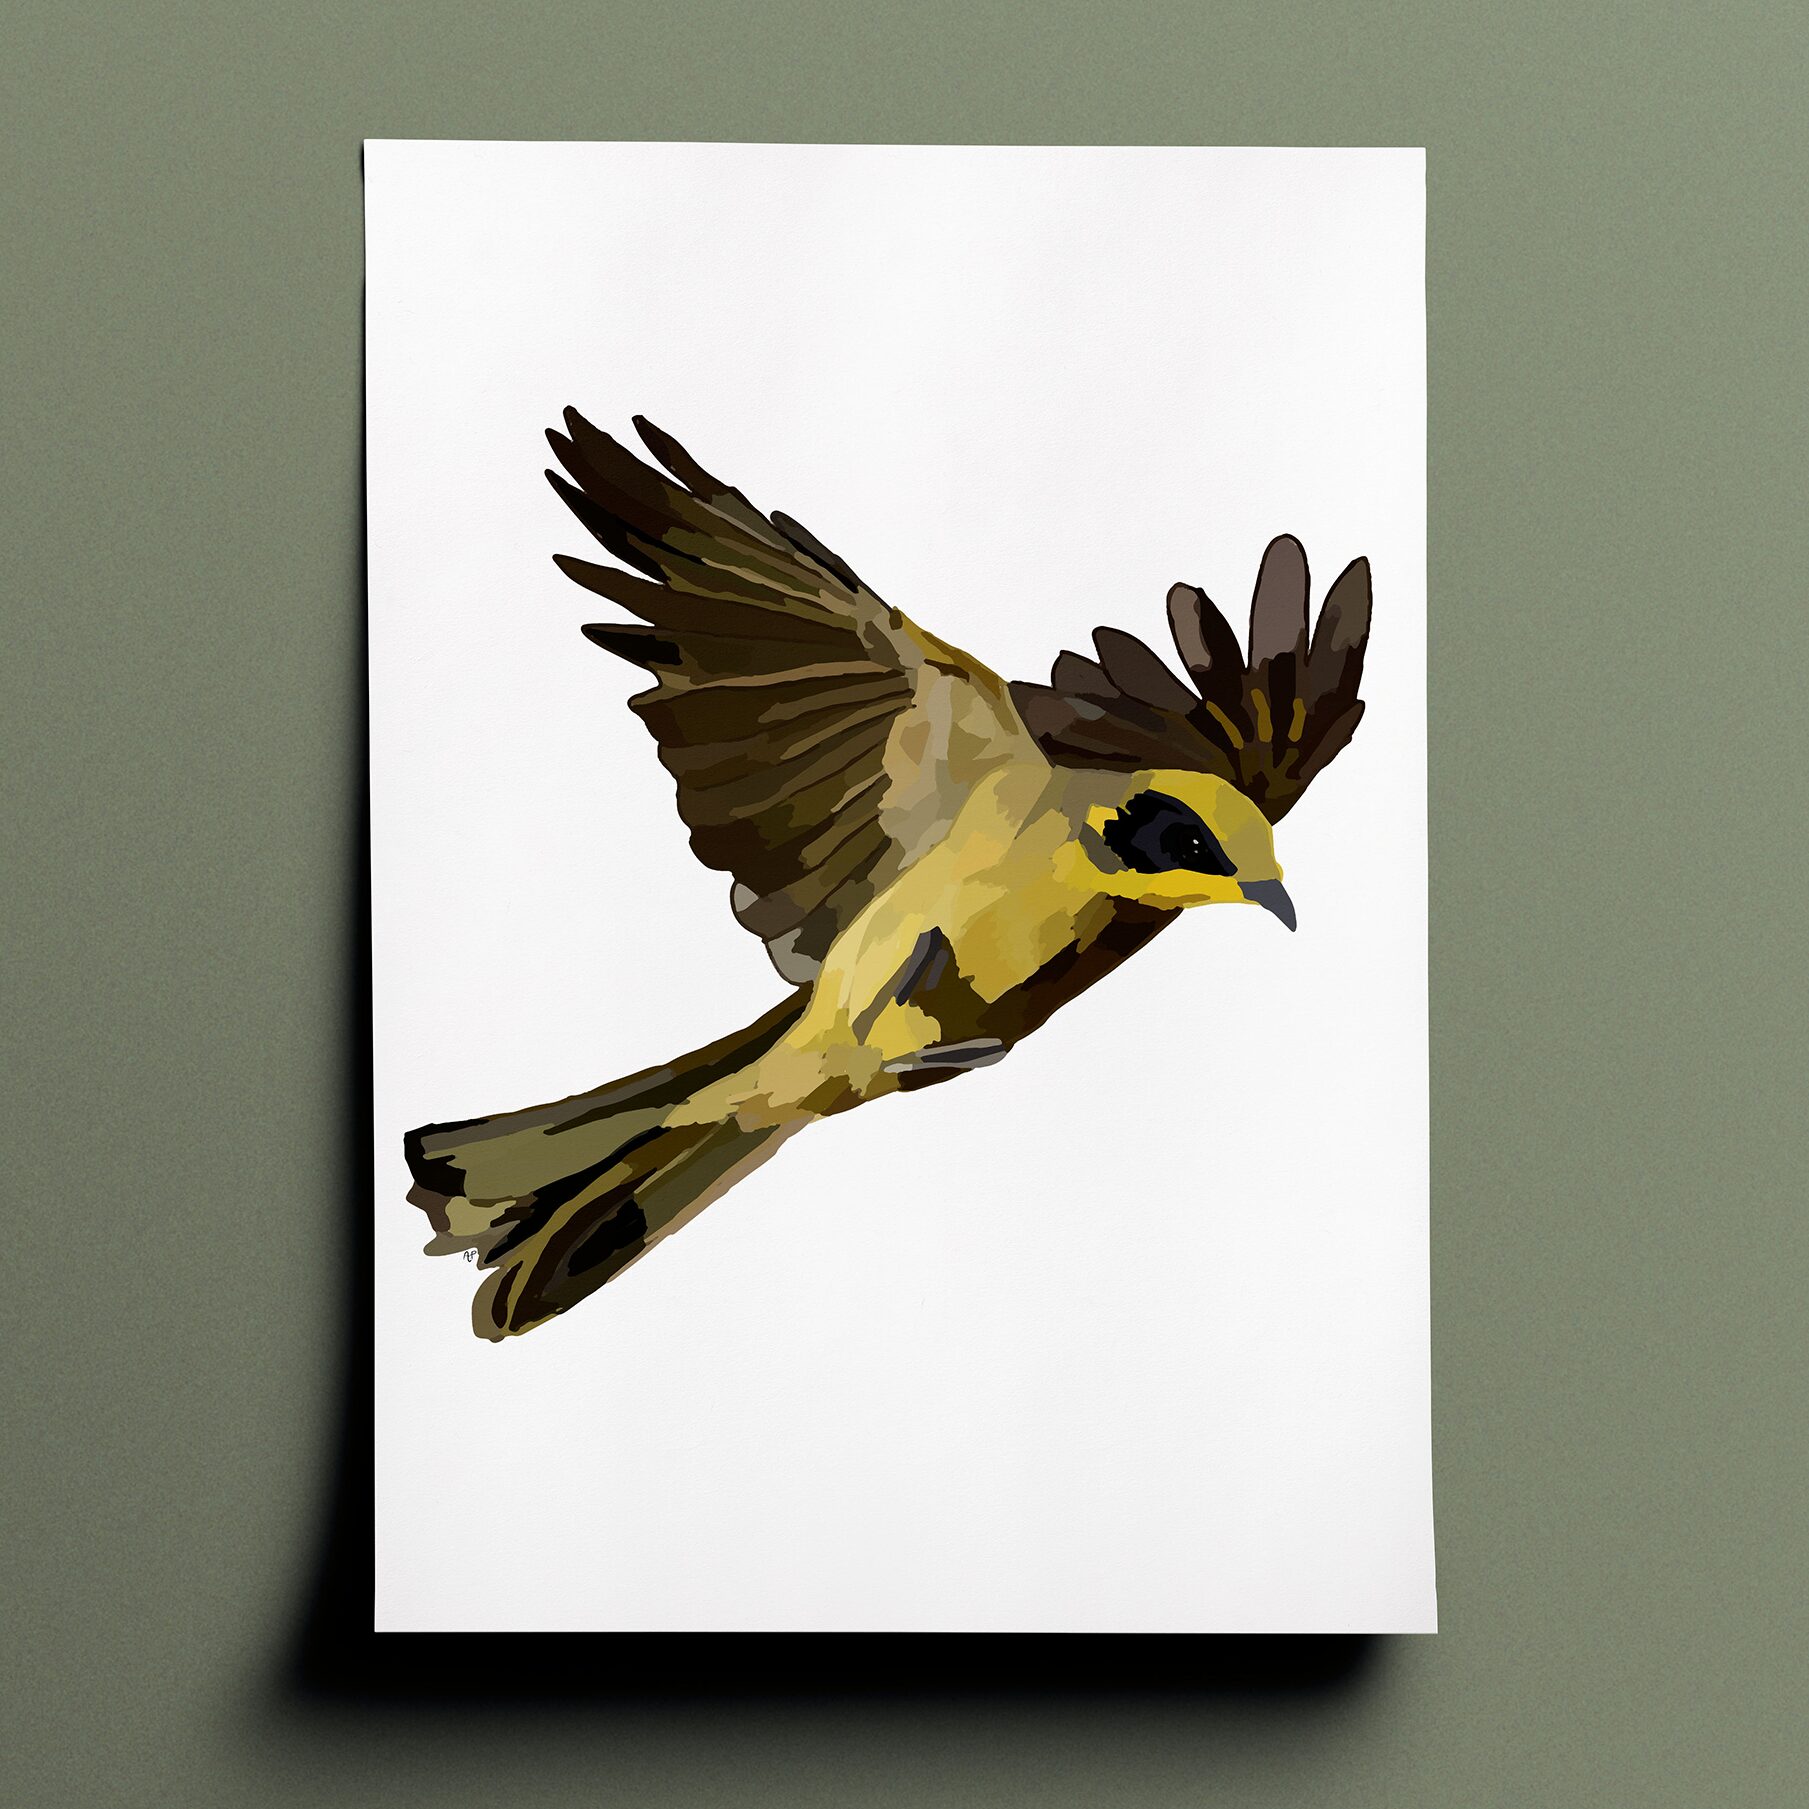 Amelia's interpenetration and vision of a helmeted honeyeater in various shades of yellow and brown done in a block, shaded patchwork type style. The drawing is a side view of the bird mid flight who is facing to the right of the page.